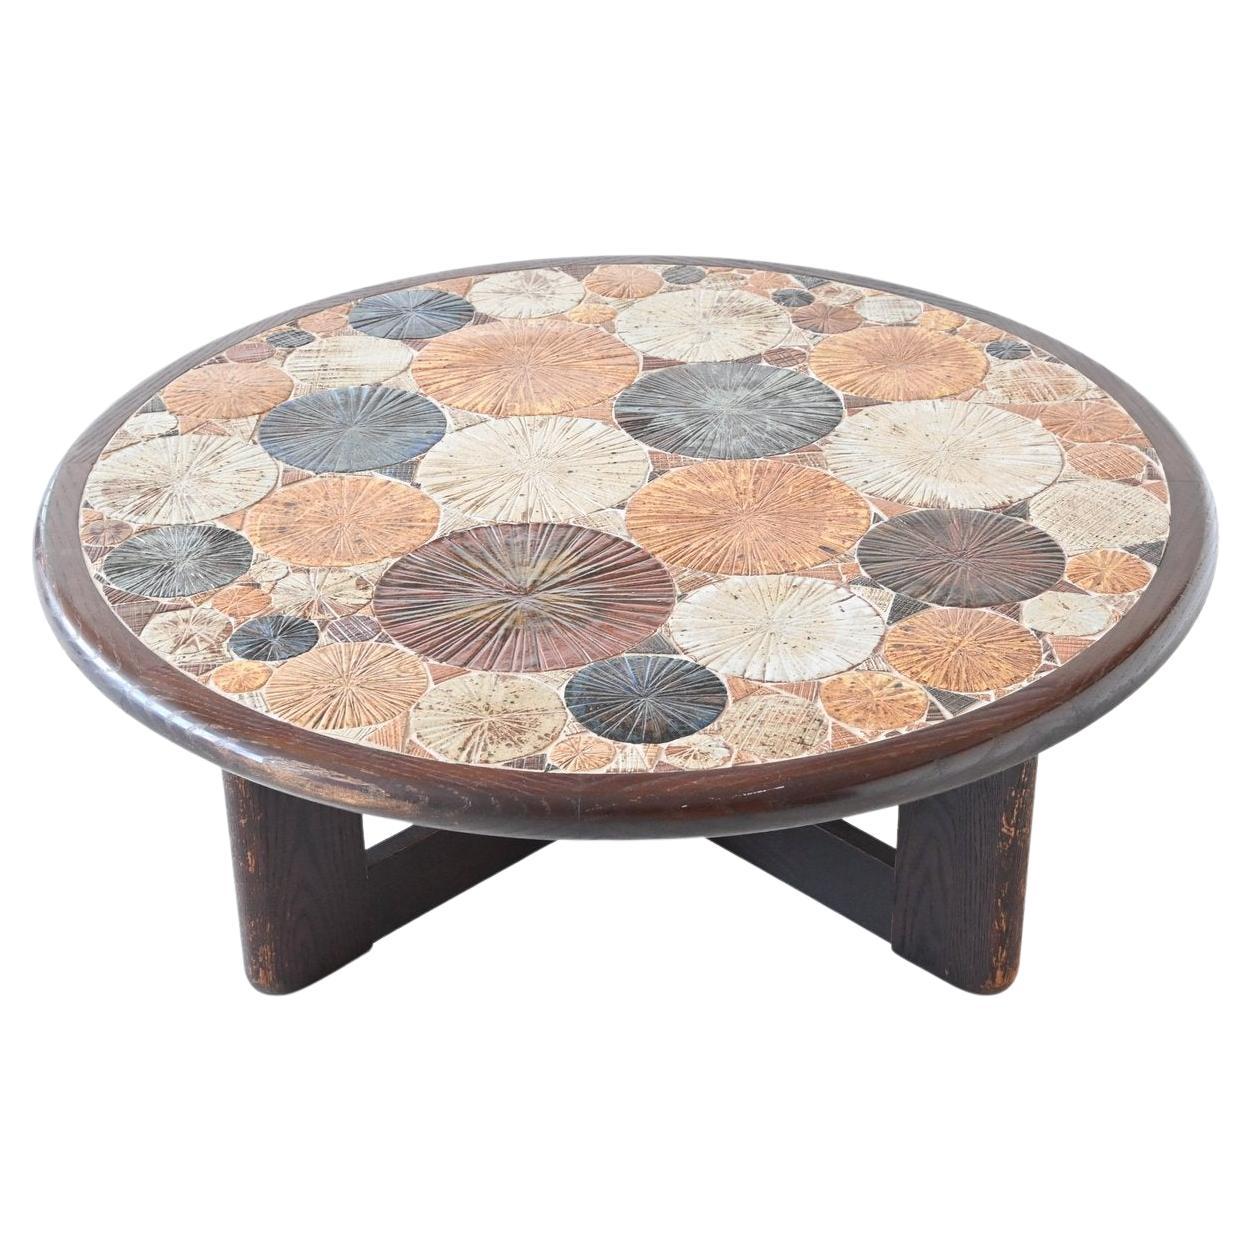 Tue Poulsen Ceramic and Oak Coffee Table Haslev Denmark 1963